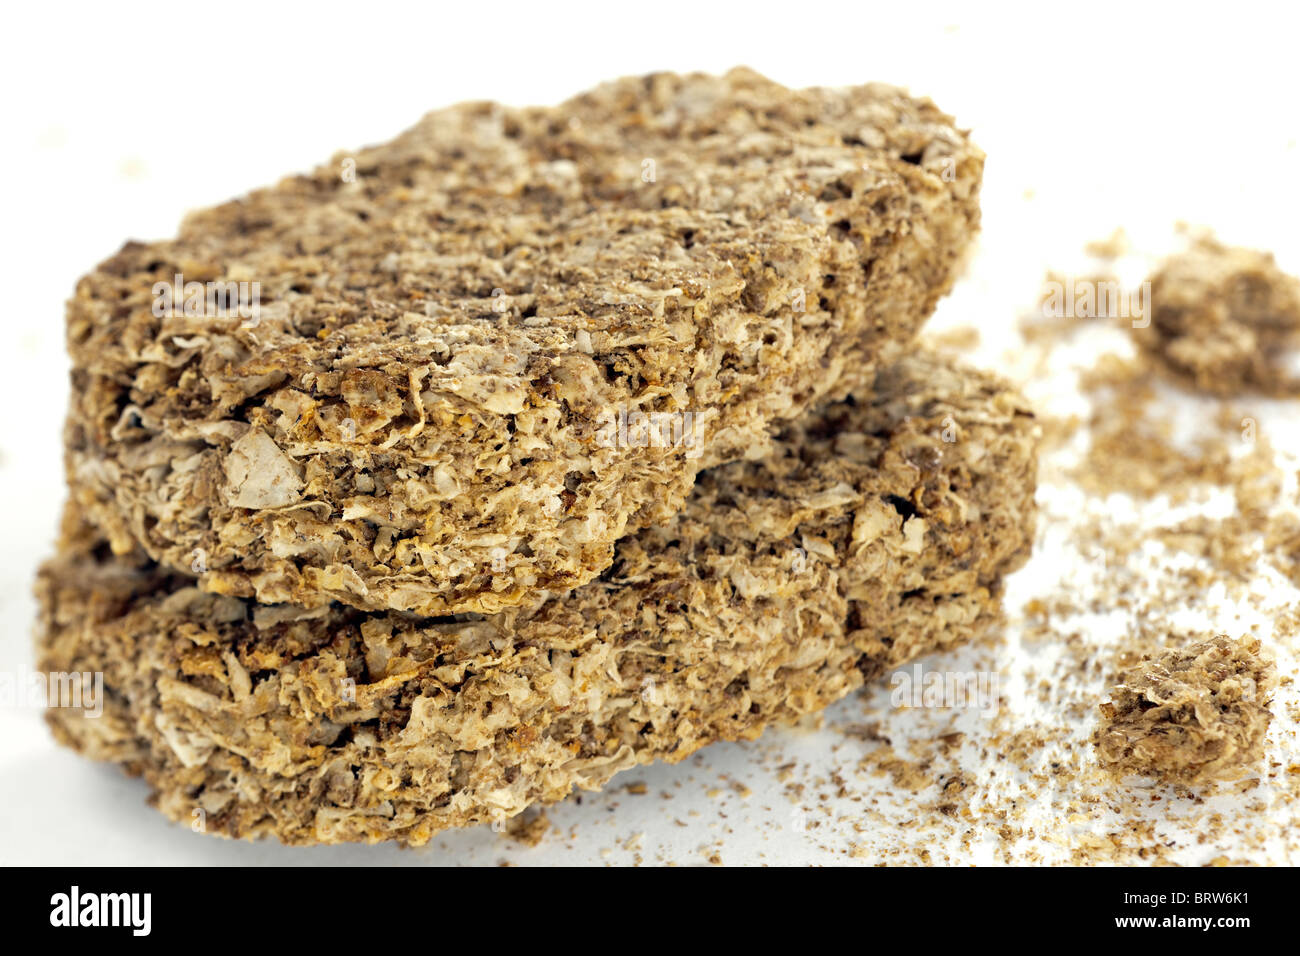 Two Weetabix breakfast cereal biscuits Stock Photo